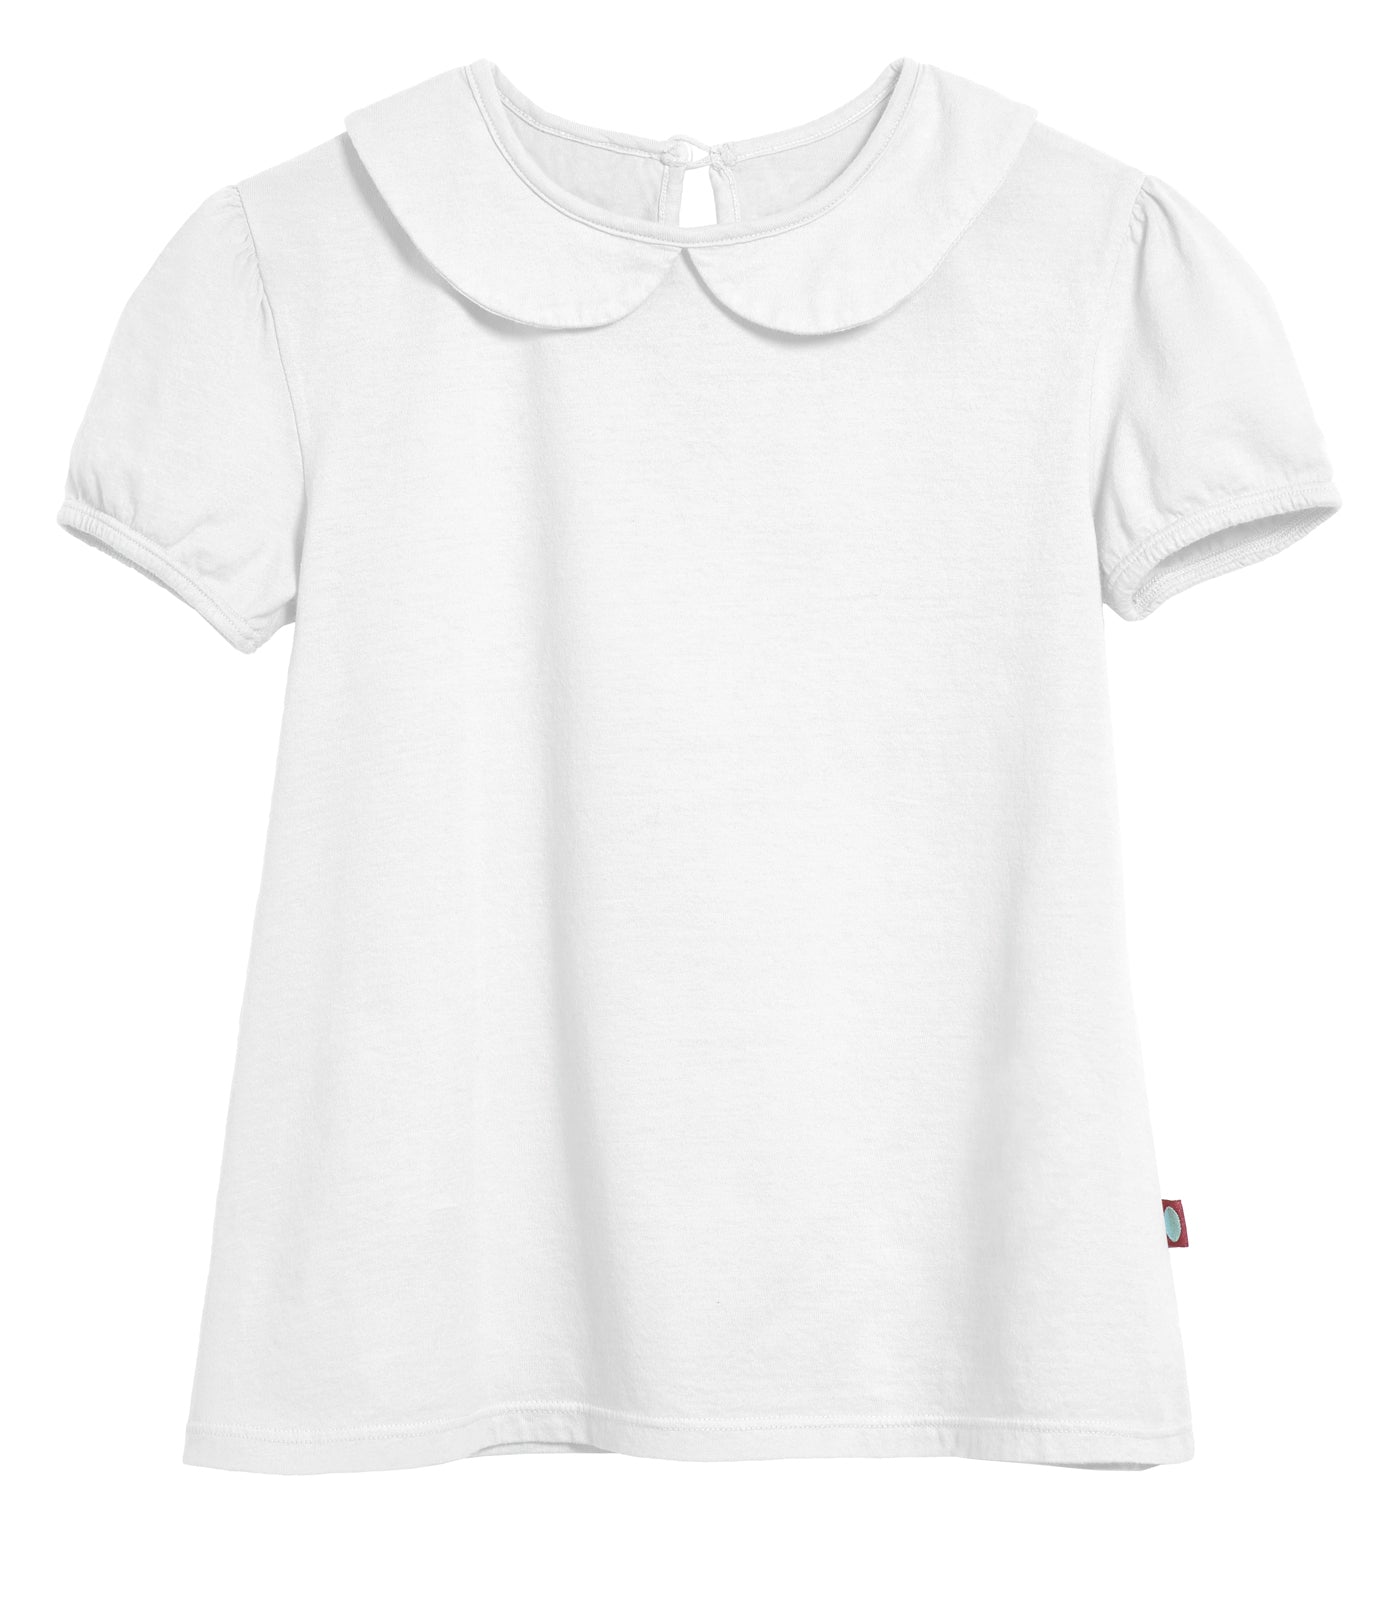 Girls Peter Pan Collar Puff Sleeve Tee | Candy Apple / 4Y - Super Comfy Kids T-Shirts, Softest 100% Cotton Tops, Sensory Friendly, USA Made, City